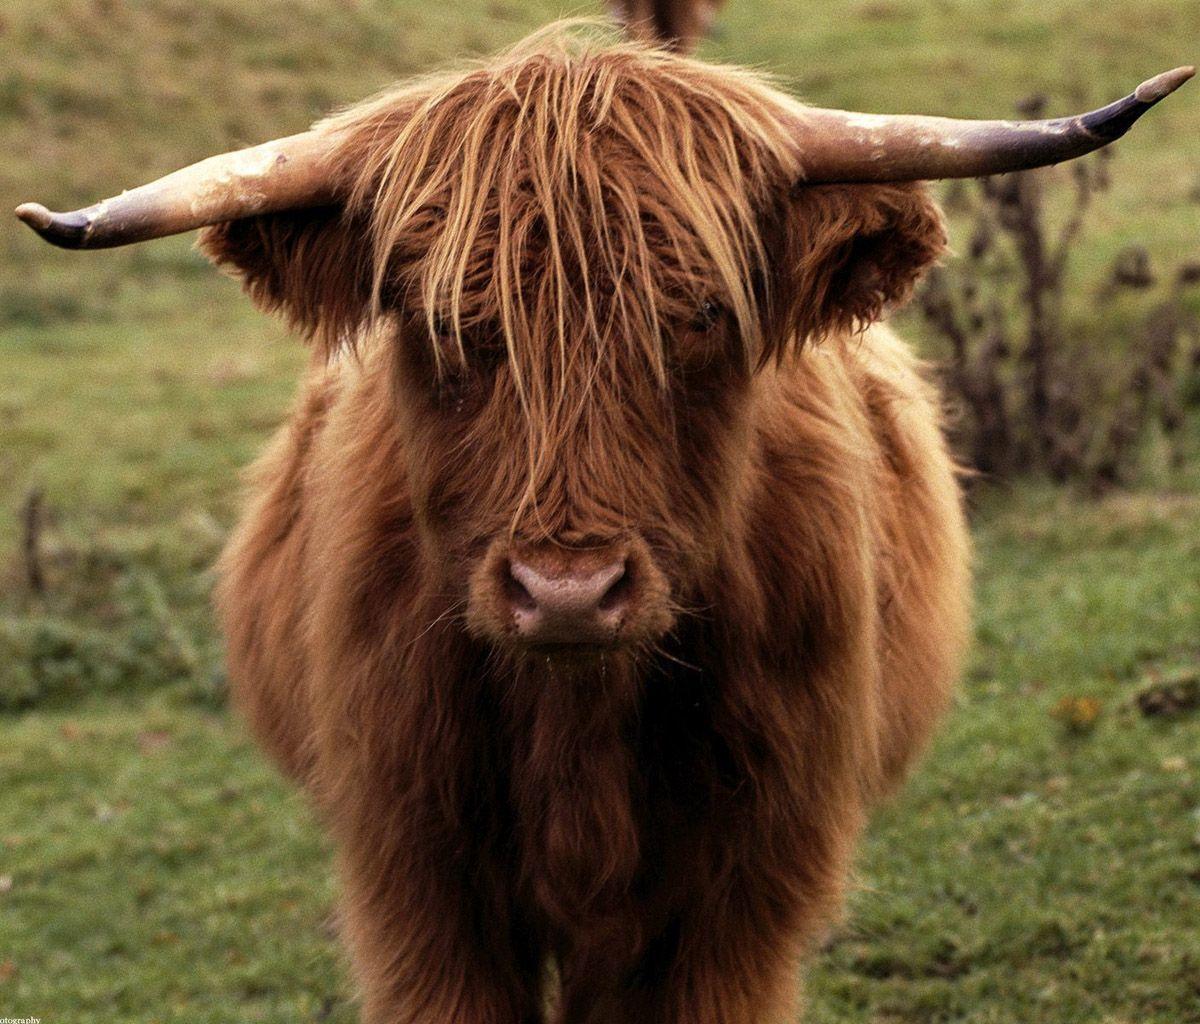 Loved these woolly cows in scotland